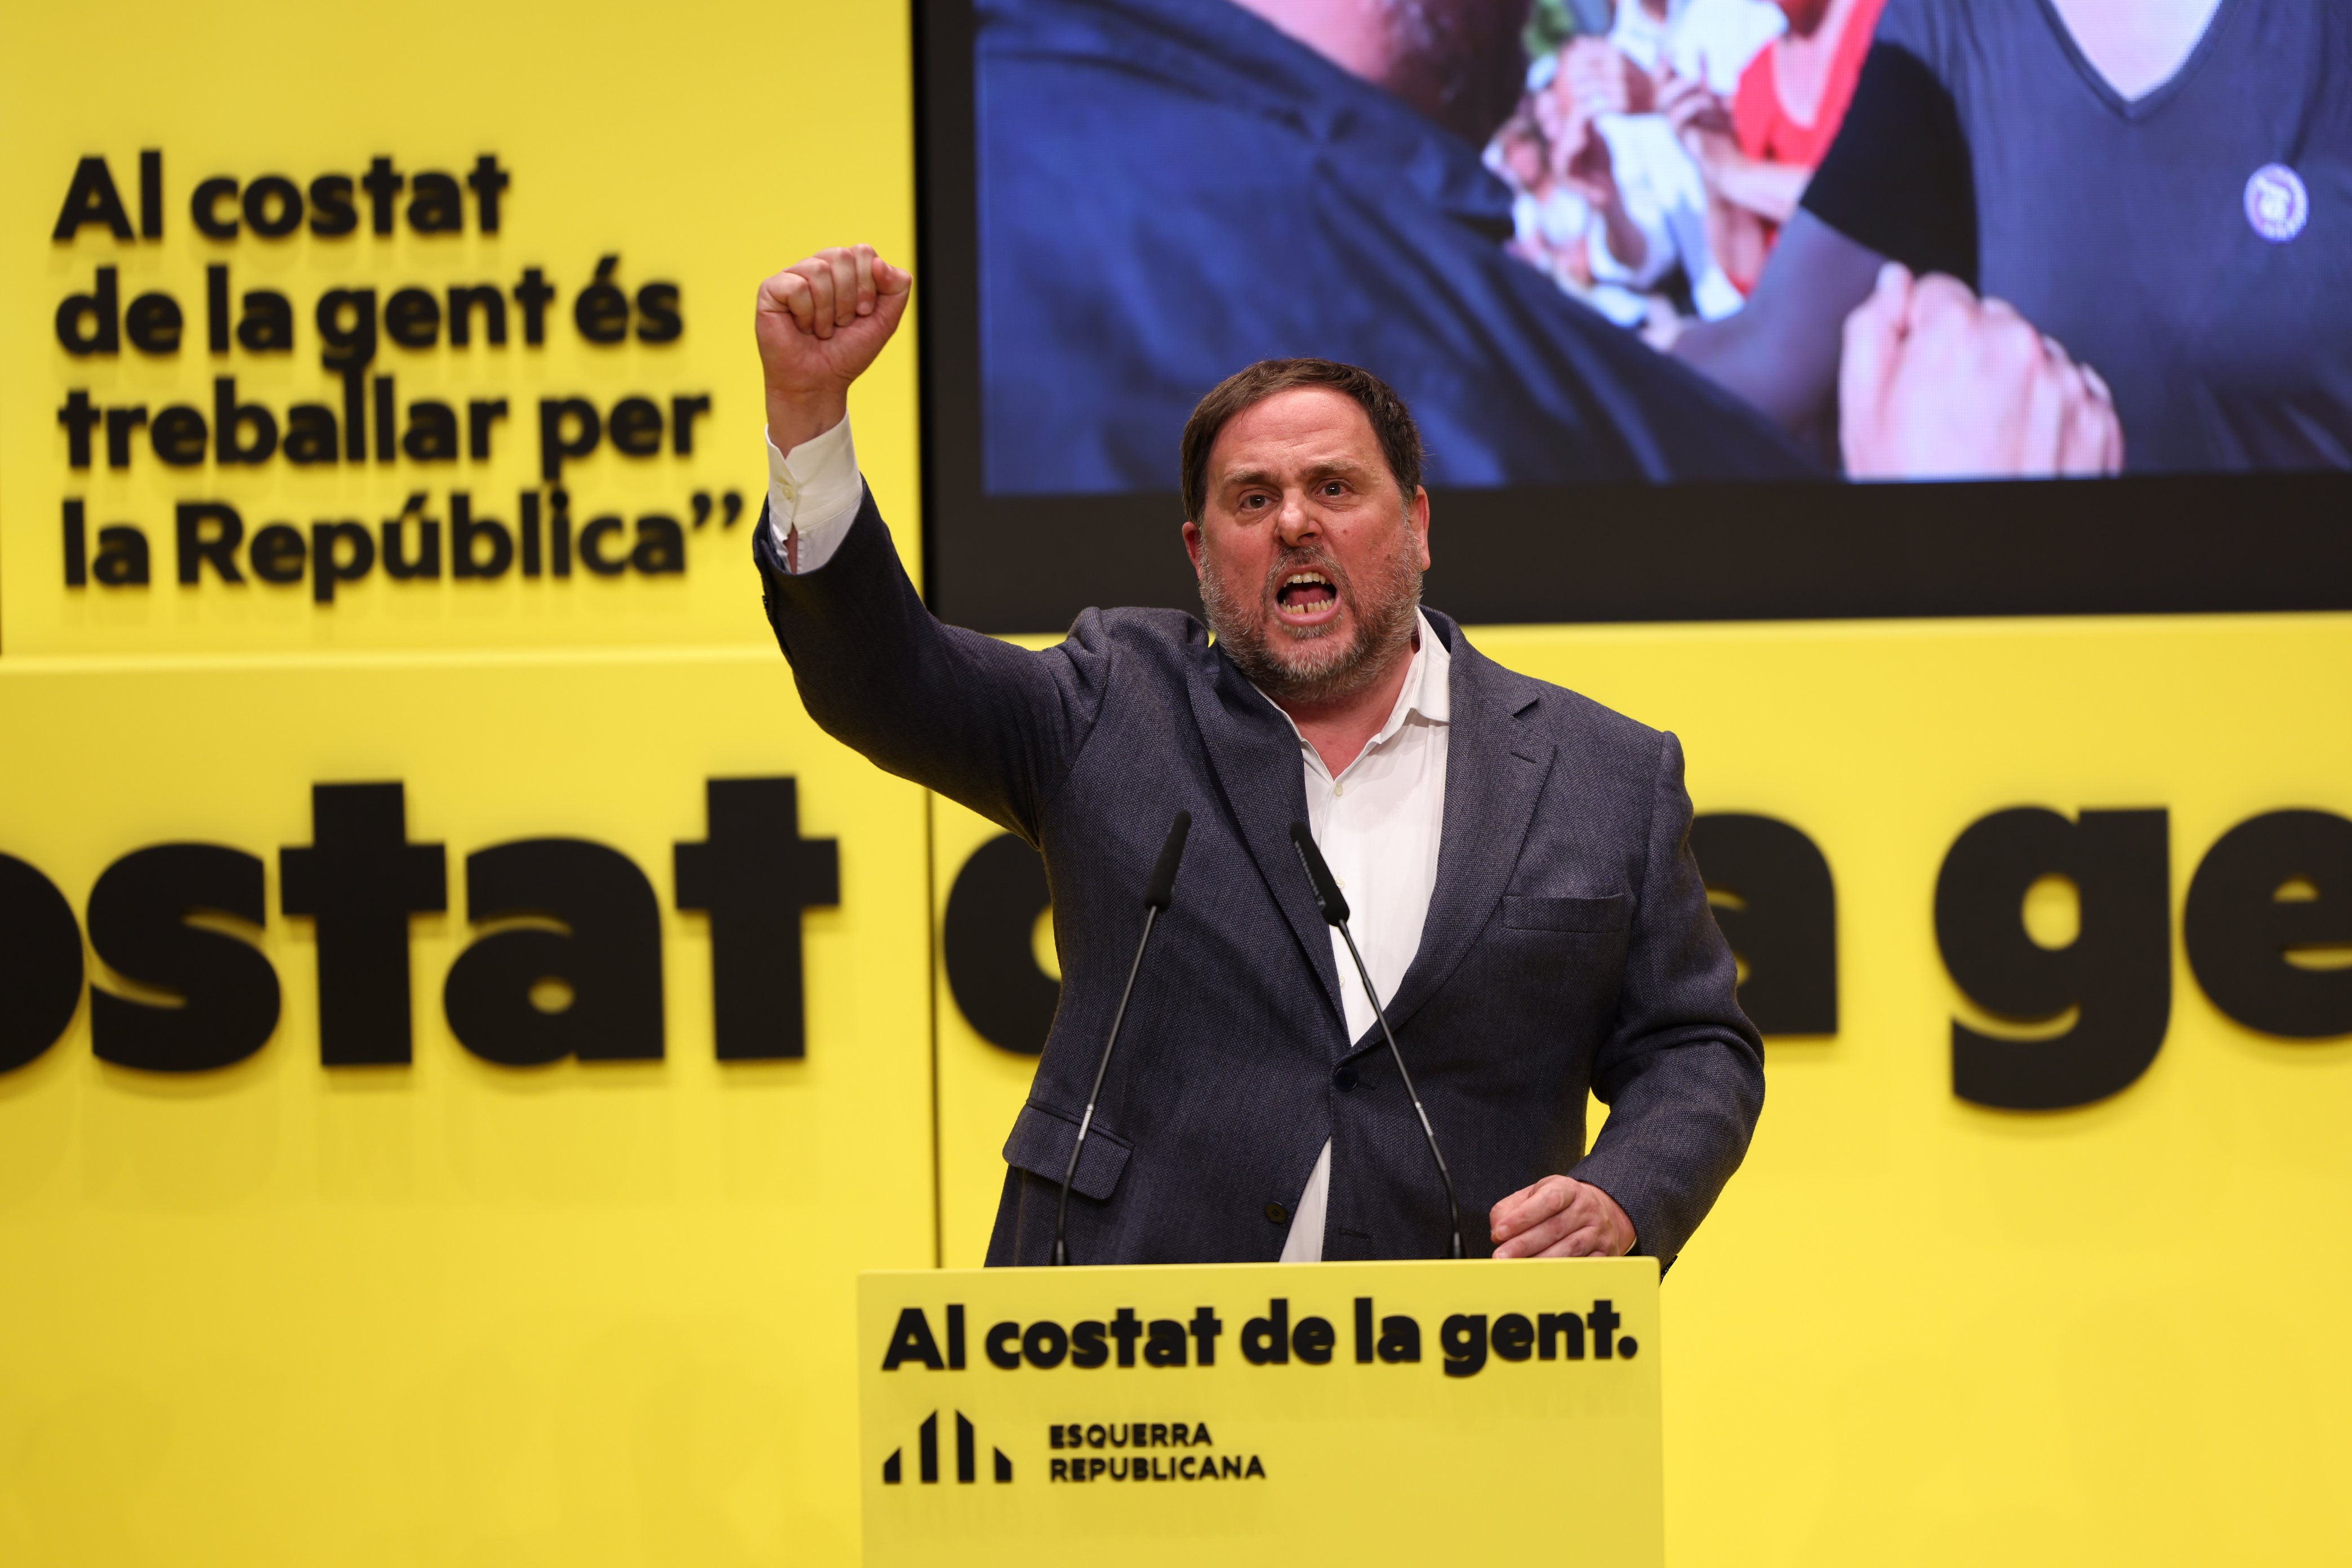 An energized Junqueras: "If ERC doesn't win, it'll be those who always win"